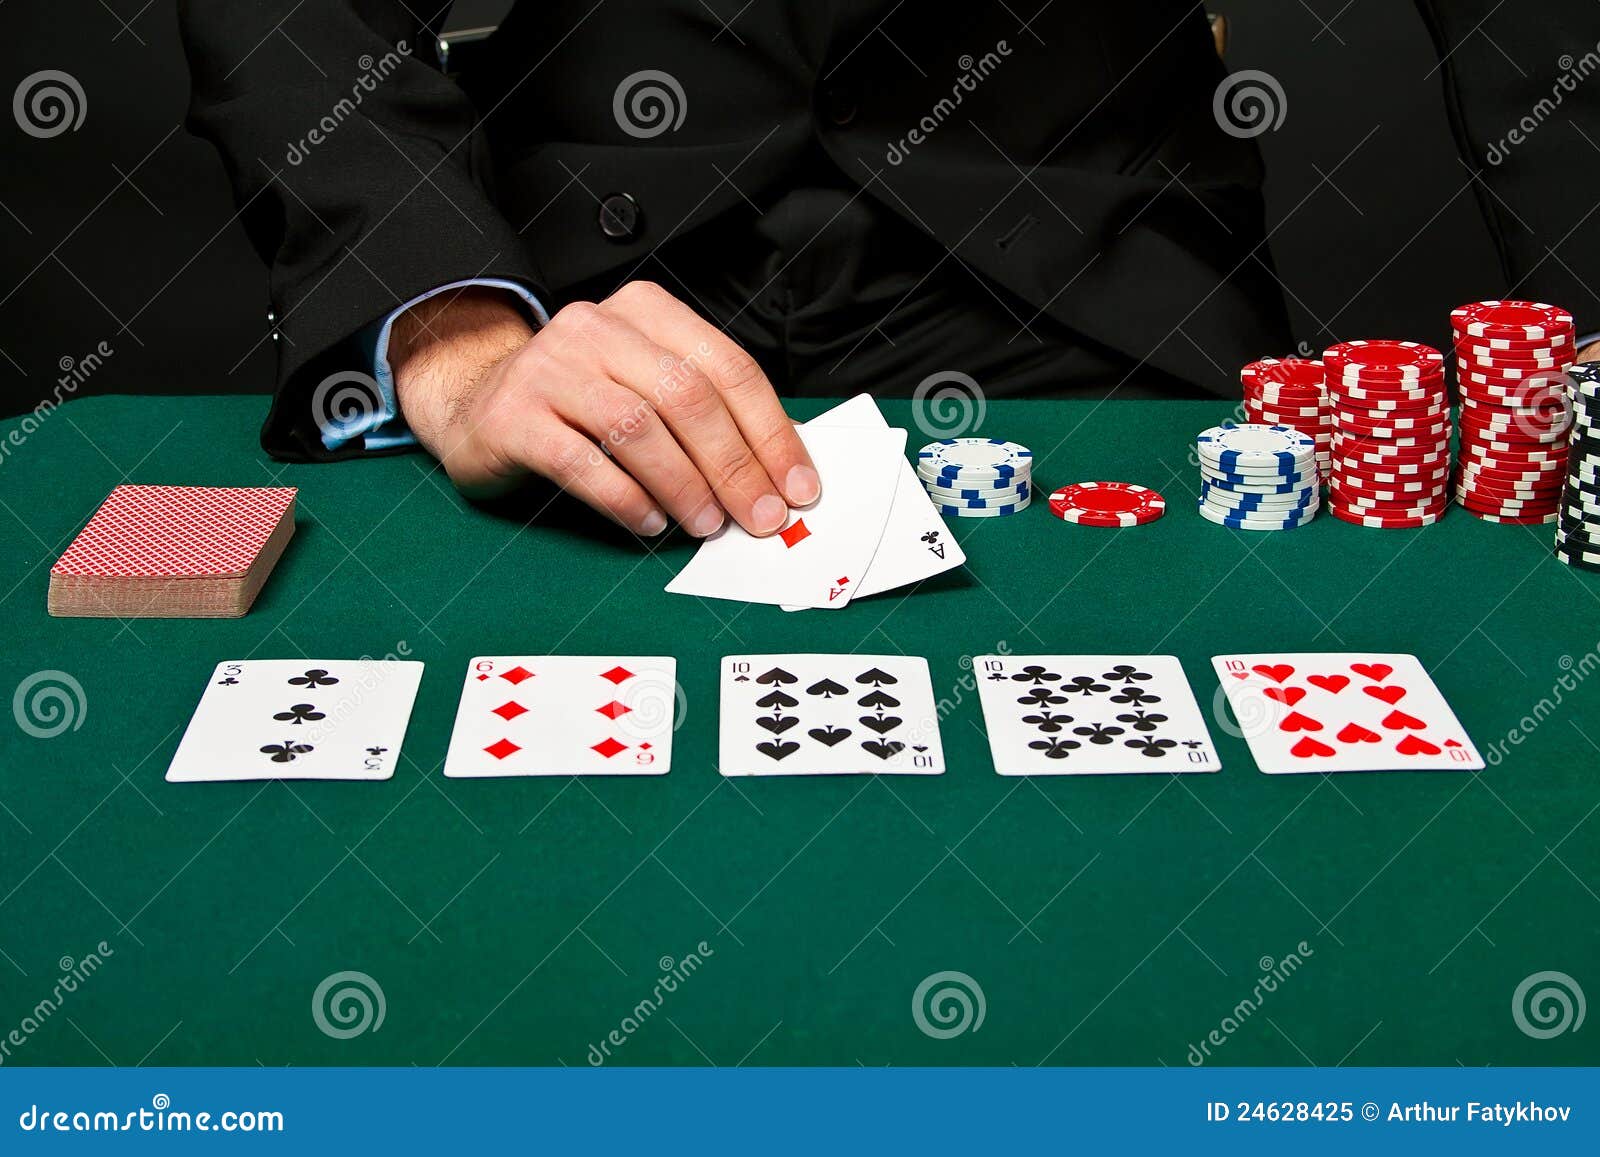 gambler with cards and chips.